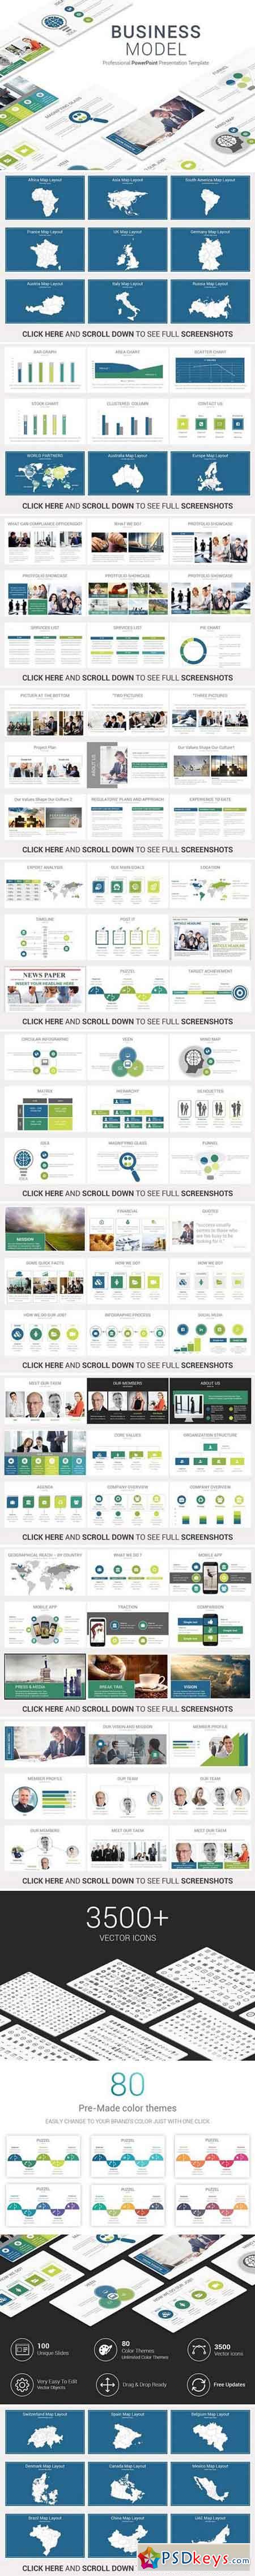 Business Model PowerPoint Template 2072277